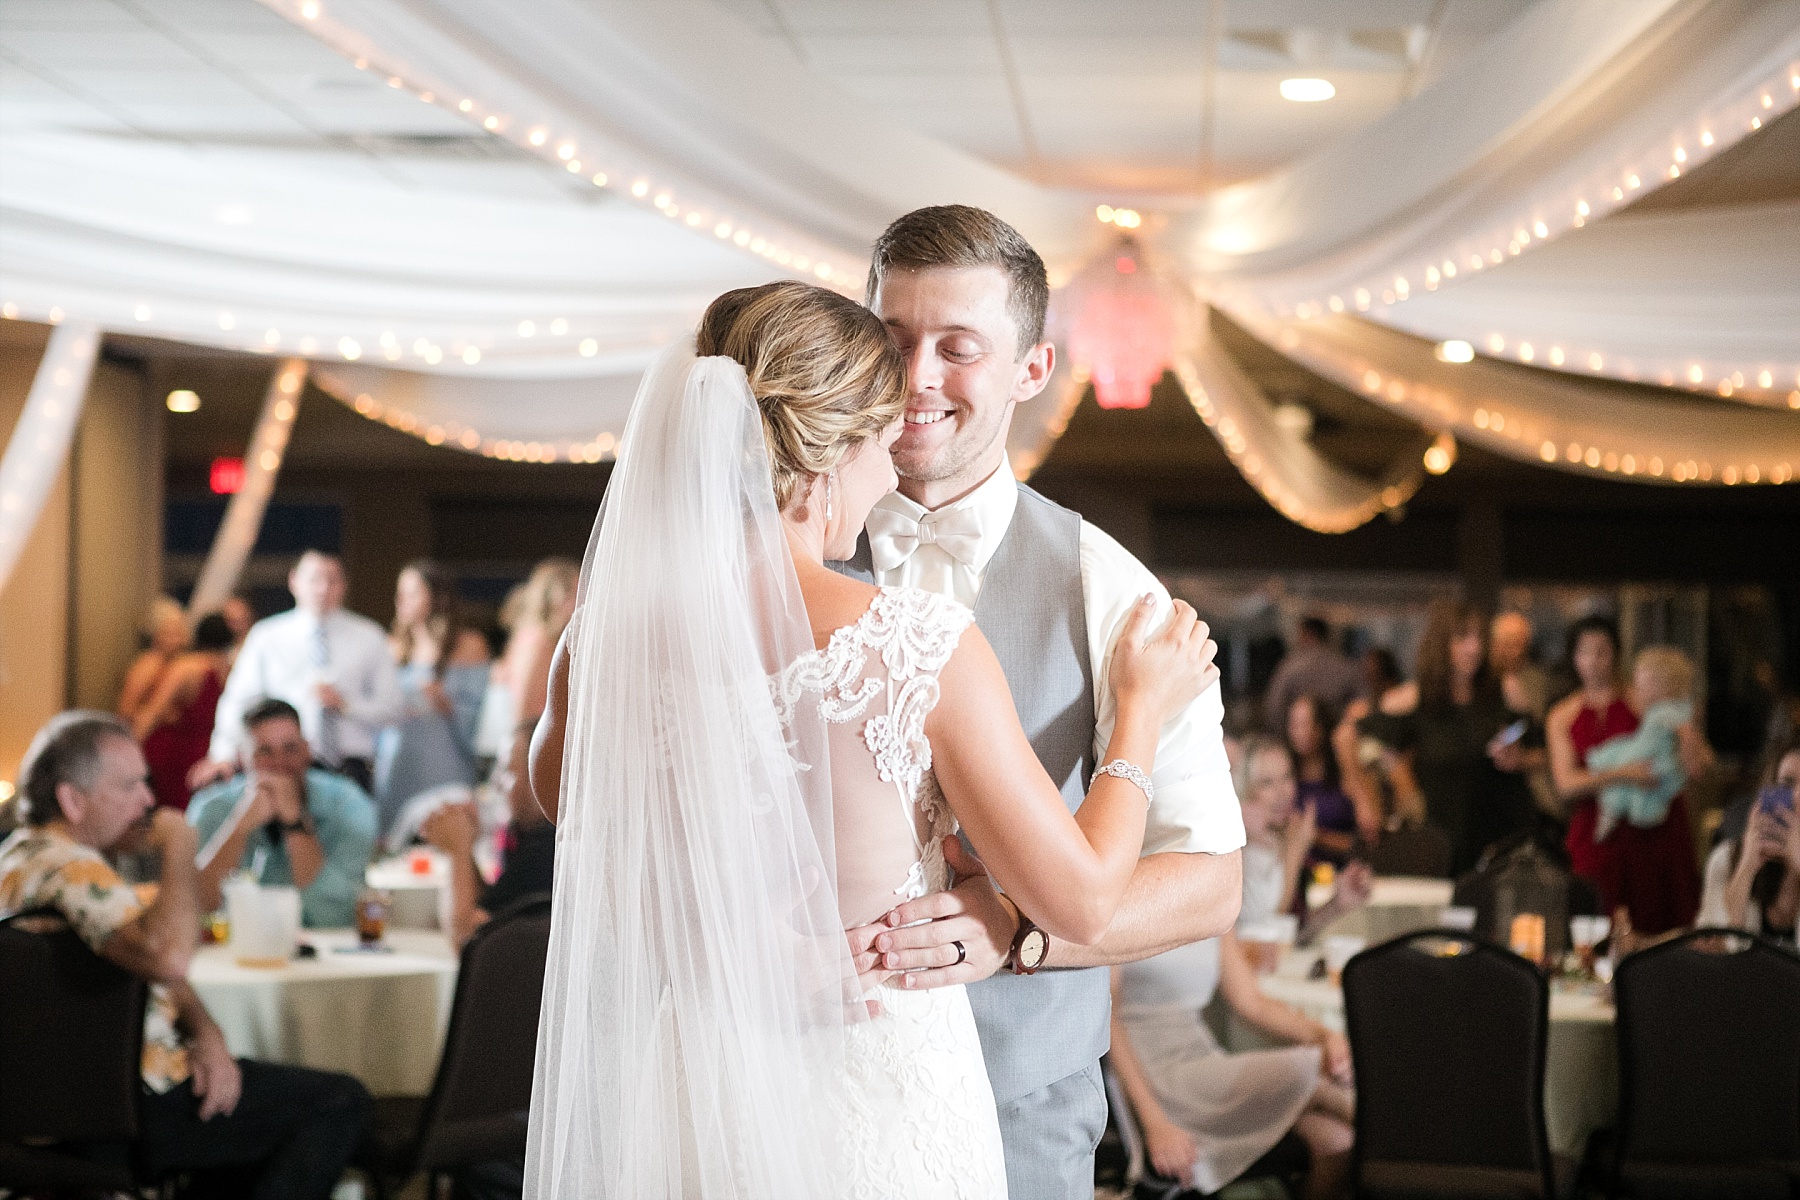 They radiated joy and love for one another as the storm rolled in over their ceremony for an elegant Wild Ridge Golf wedding.